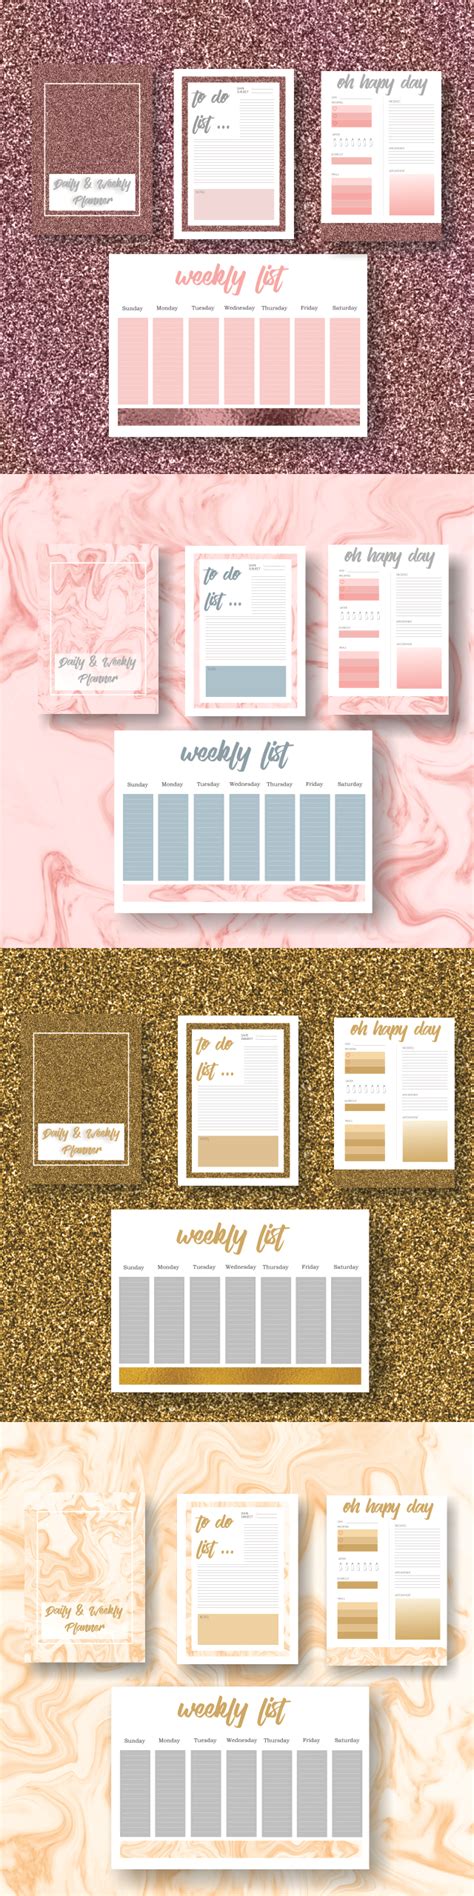 Join millions of others & build your free resume & land your dream job! Daily and weekly planner, printable | Daily planner ...